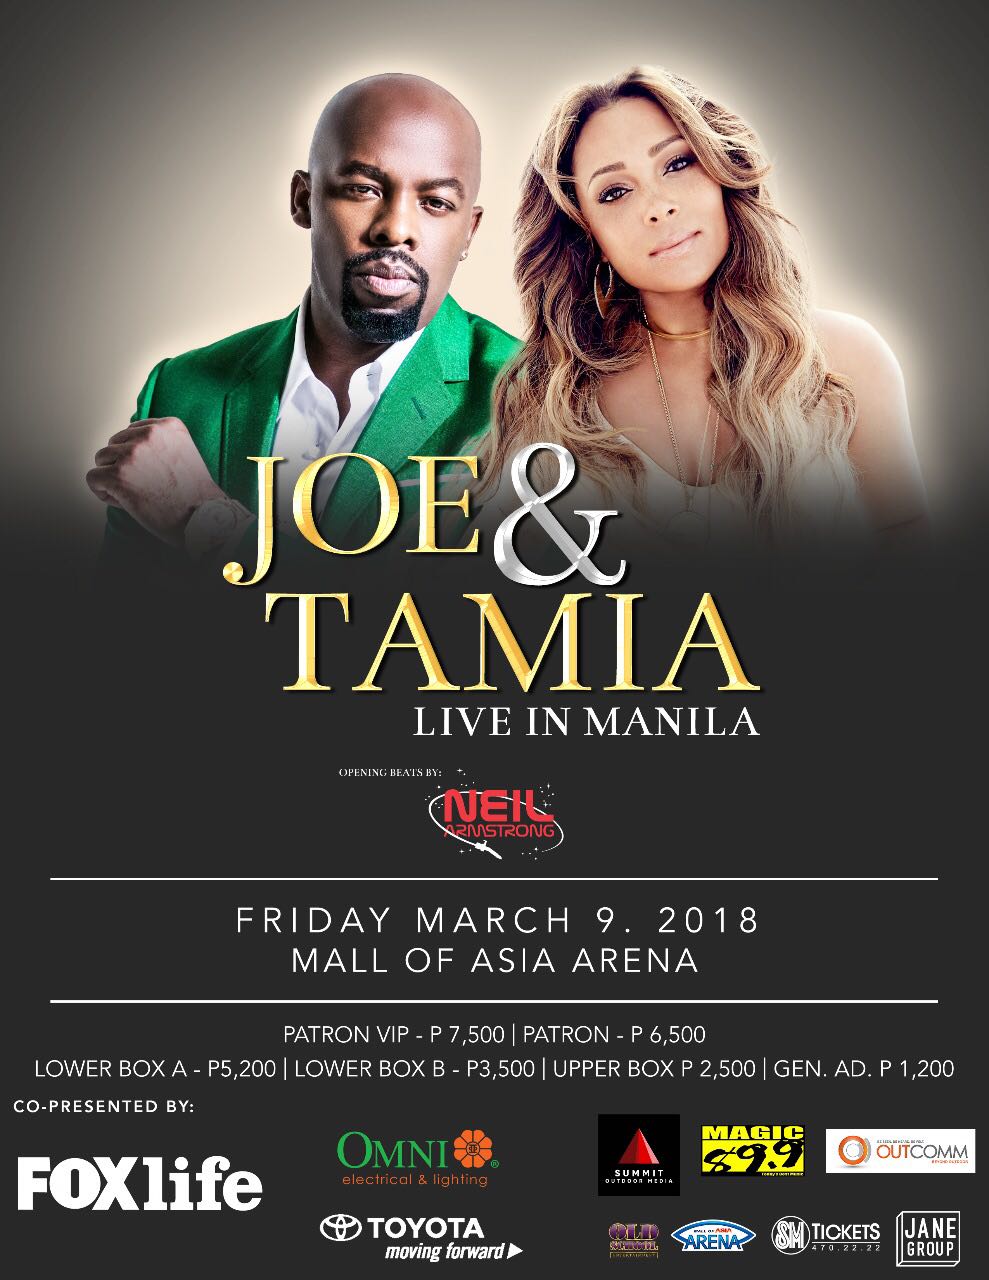 Joe and Tamia will be performing for a onenight only concert in Manila